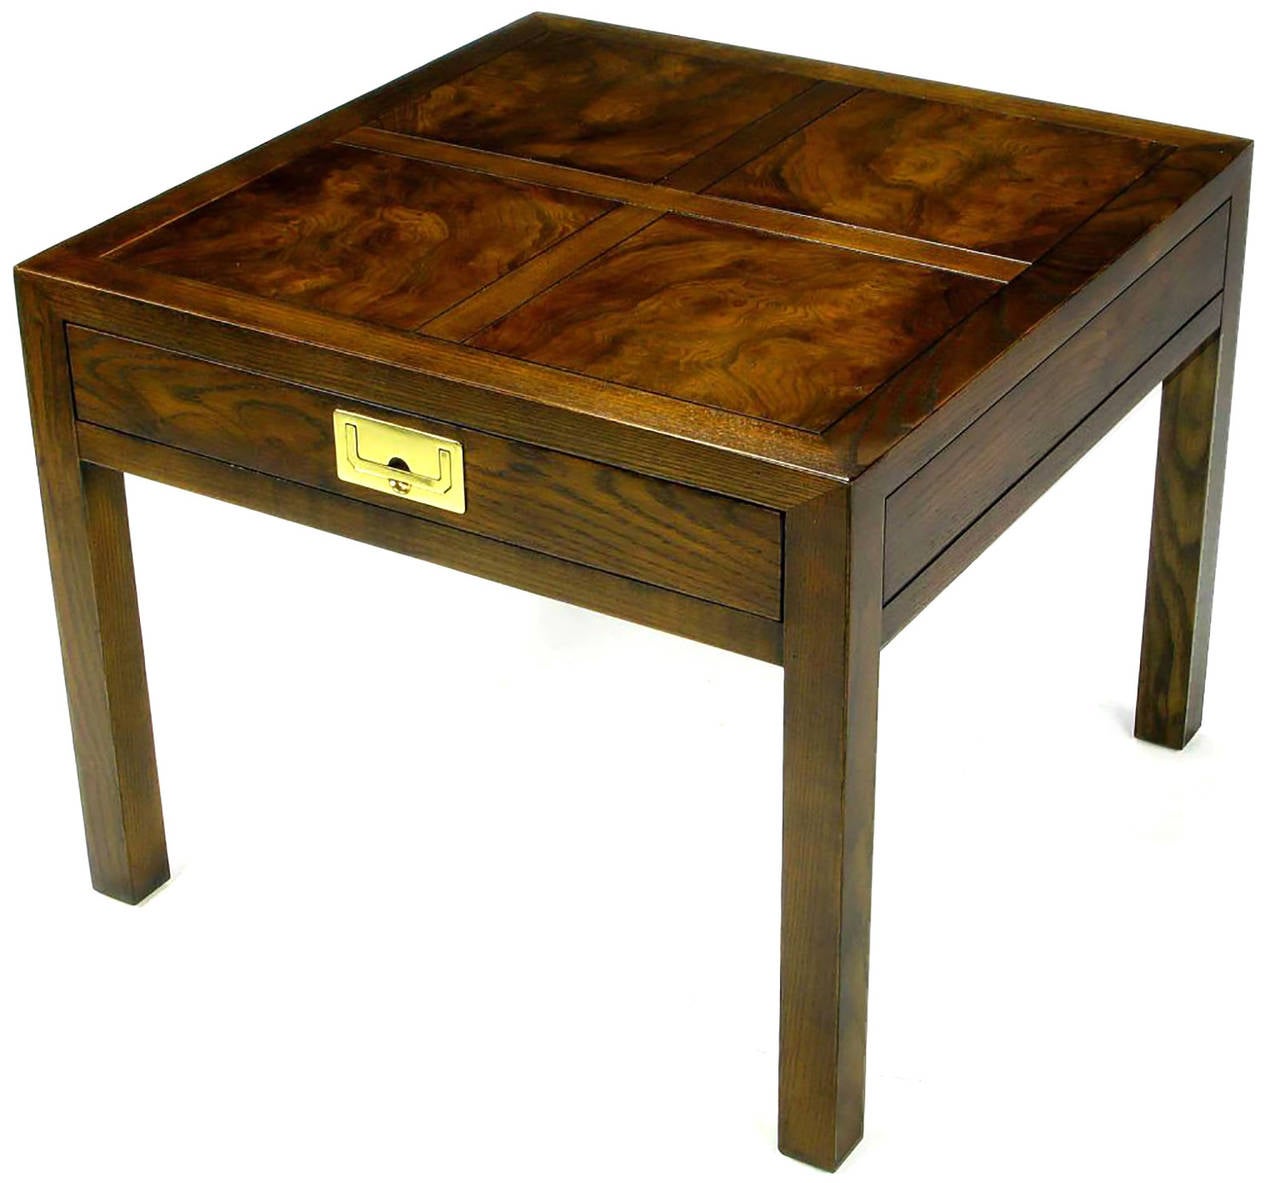 Excellent walnut and burled walnut Campaign end table from Henredon. Burl parquetry top in a four square configuration with walnut cross borders. Recessed brass Campaign style pull.